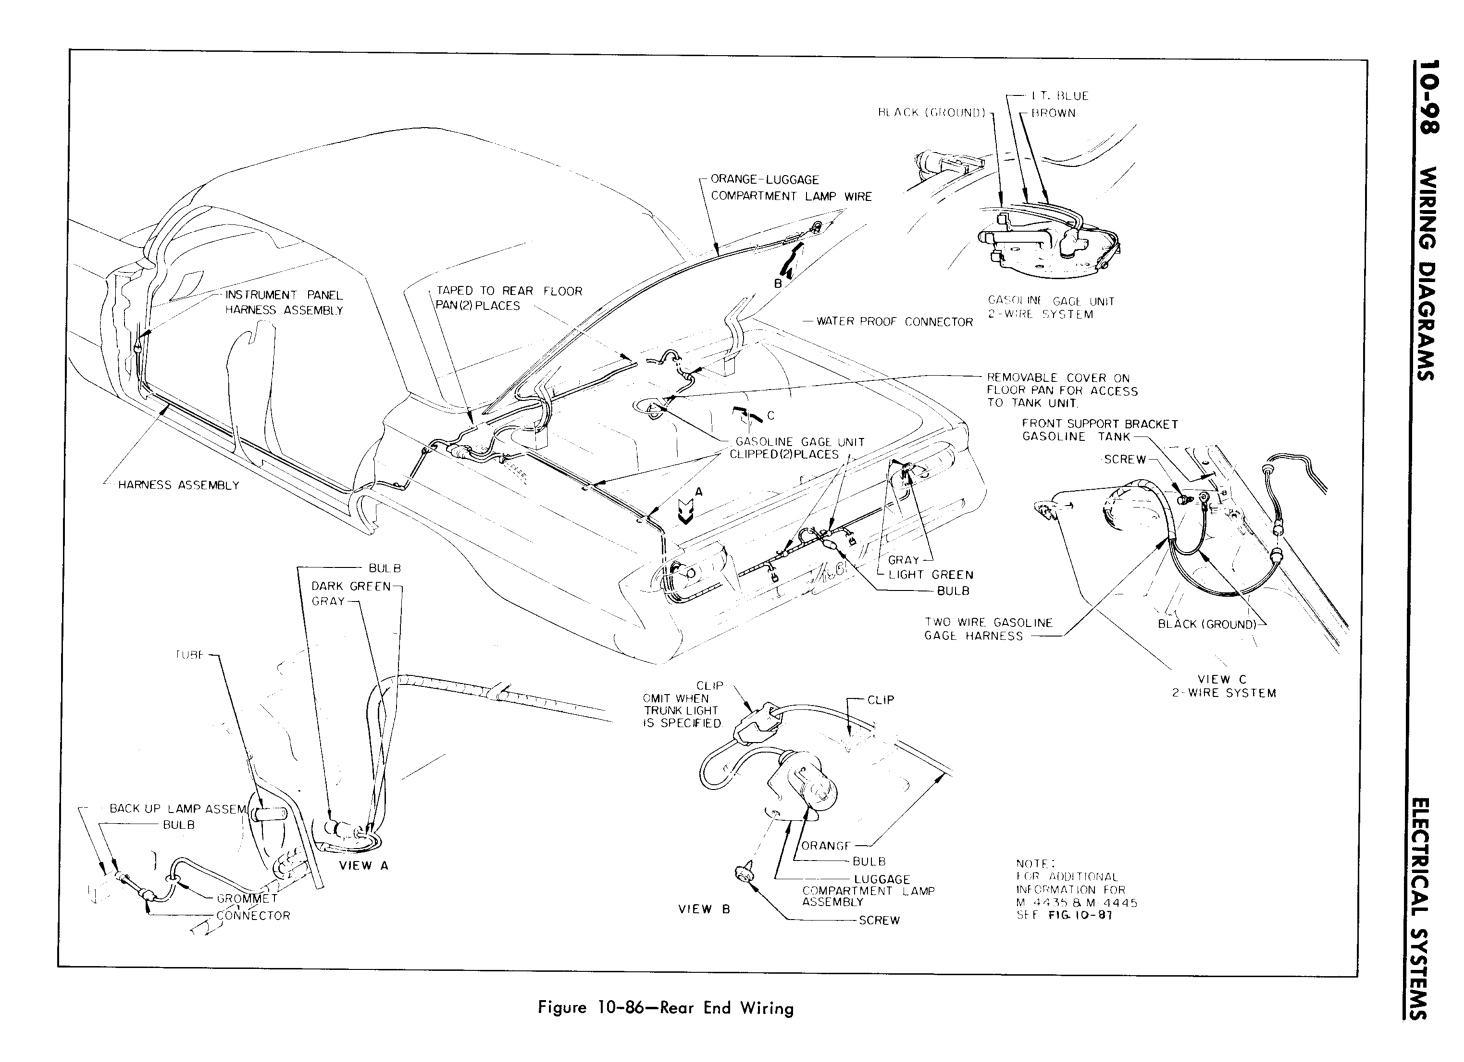 n_10 1961 Buick Shop Manual - Electrical Systems-098-098.jpg